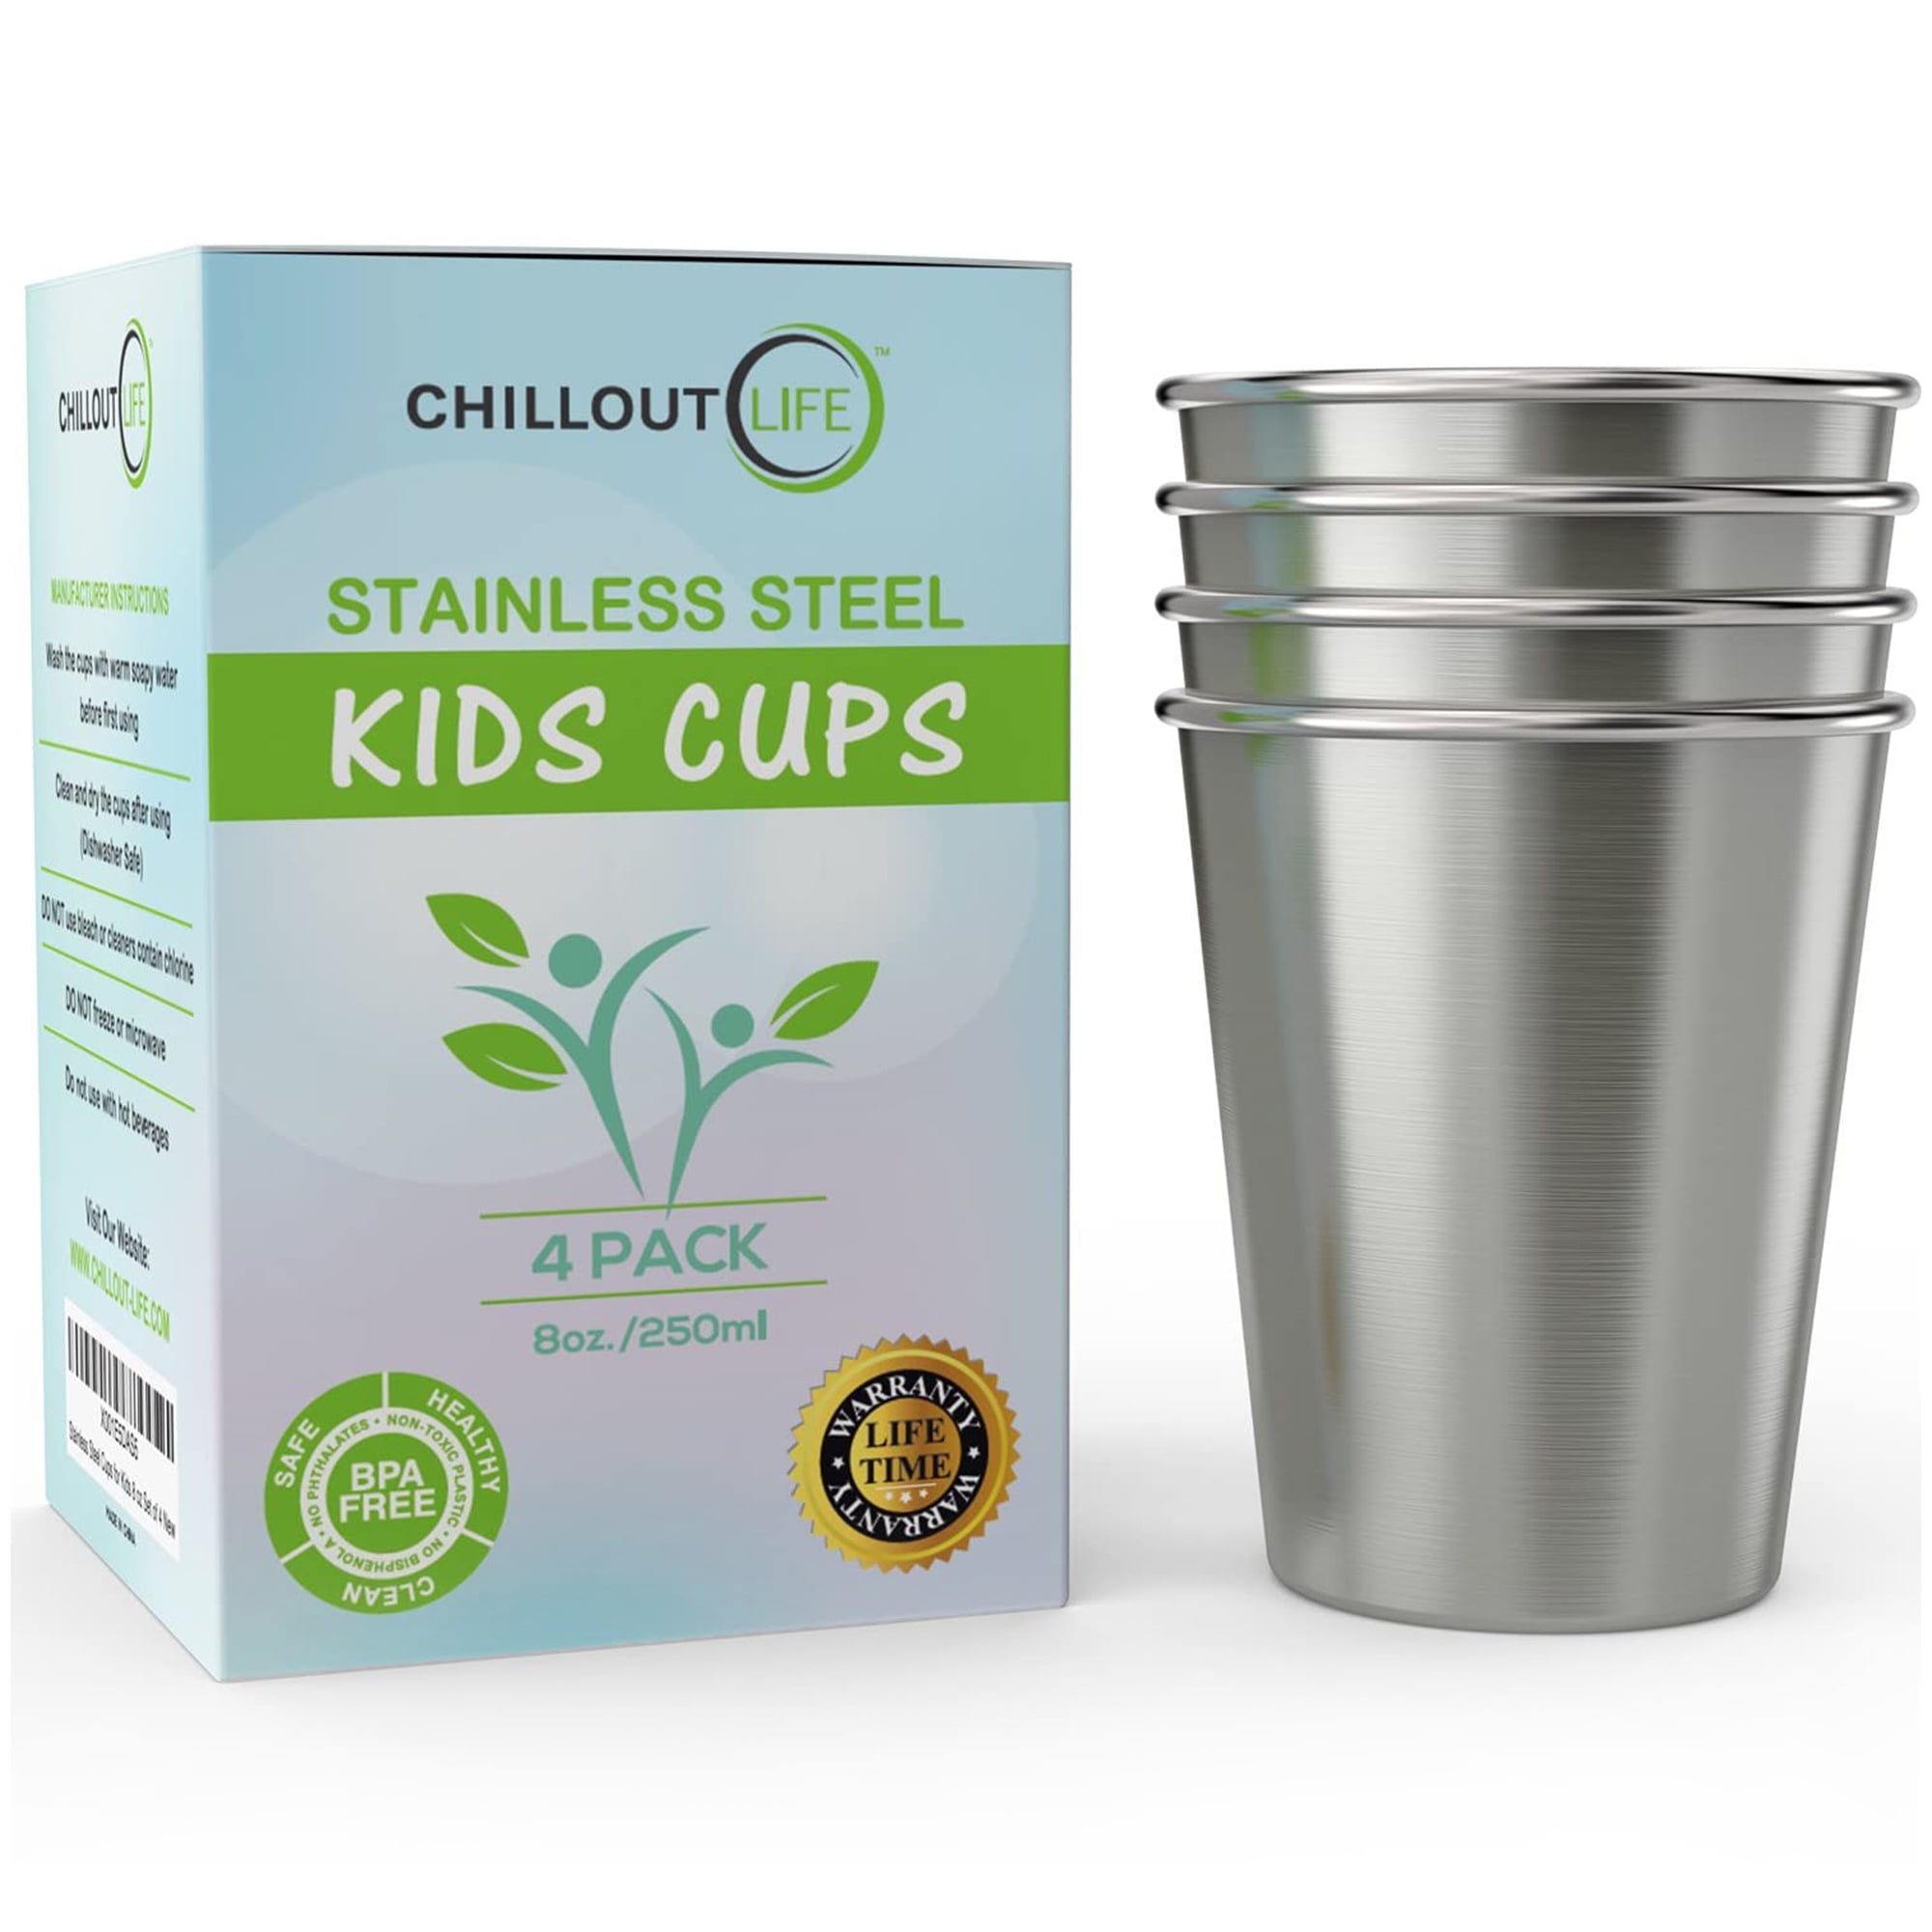 ShineMe 8oz Kids Cups Spill Proof 5pack Stainless Steel Sippy Cups with  Lids and Silicone Sleeves Reusable Toddler Cups for Hot and Cold Drinks BPA  Free Snack Cups Apply for Indoor/Outdoor 8oz